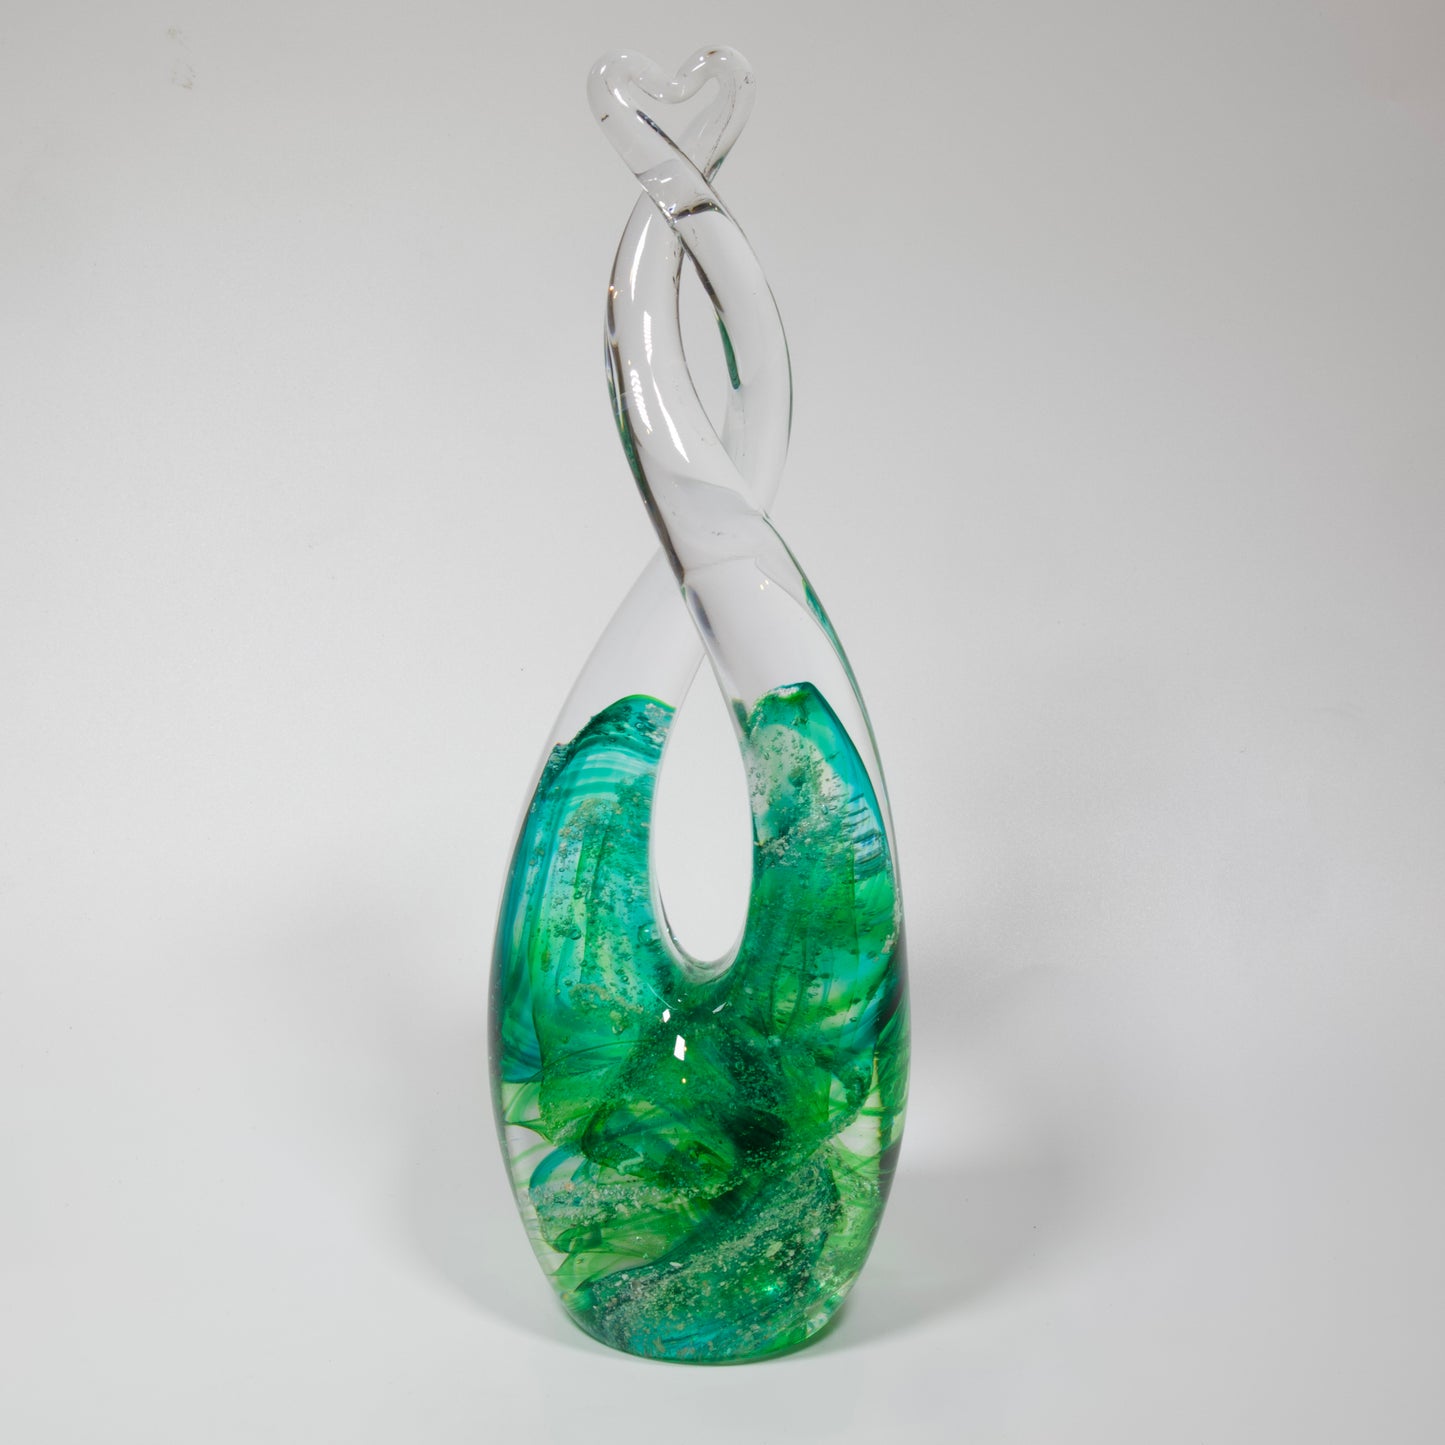 Ashes into glass heart sculpture